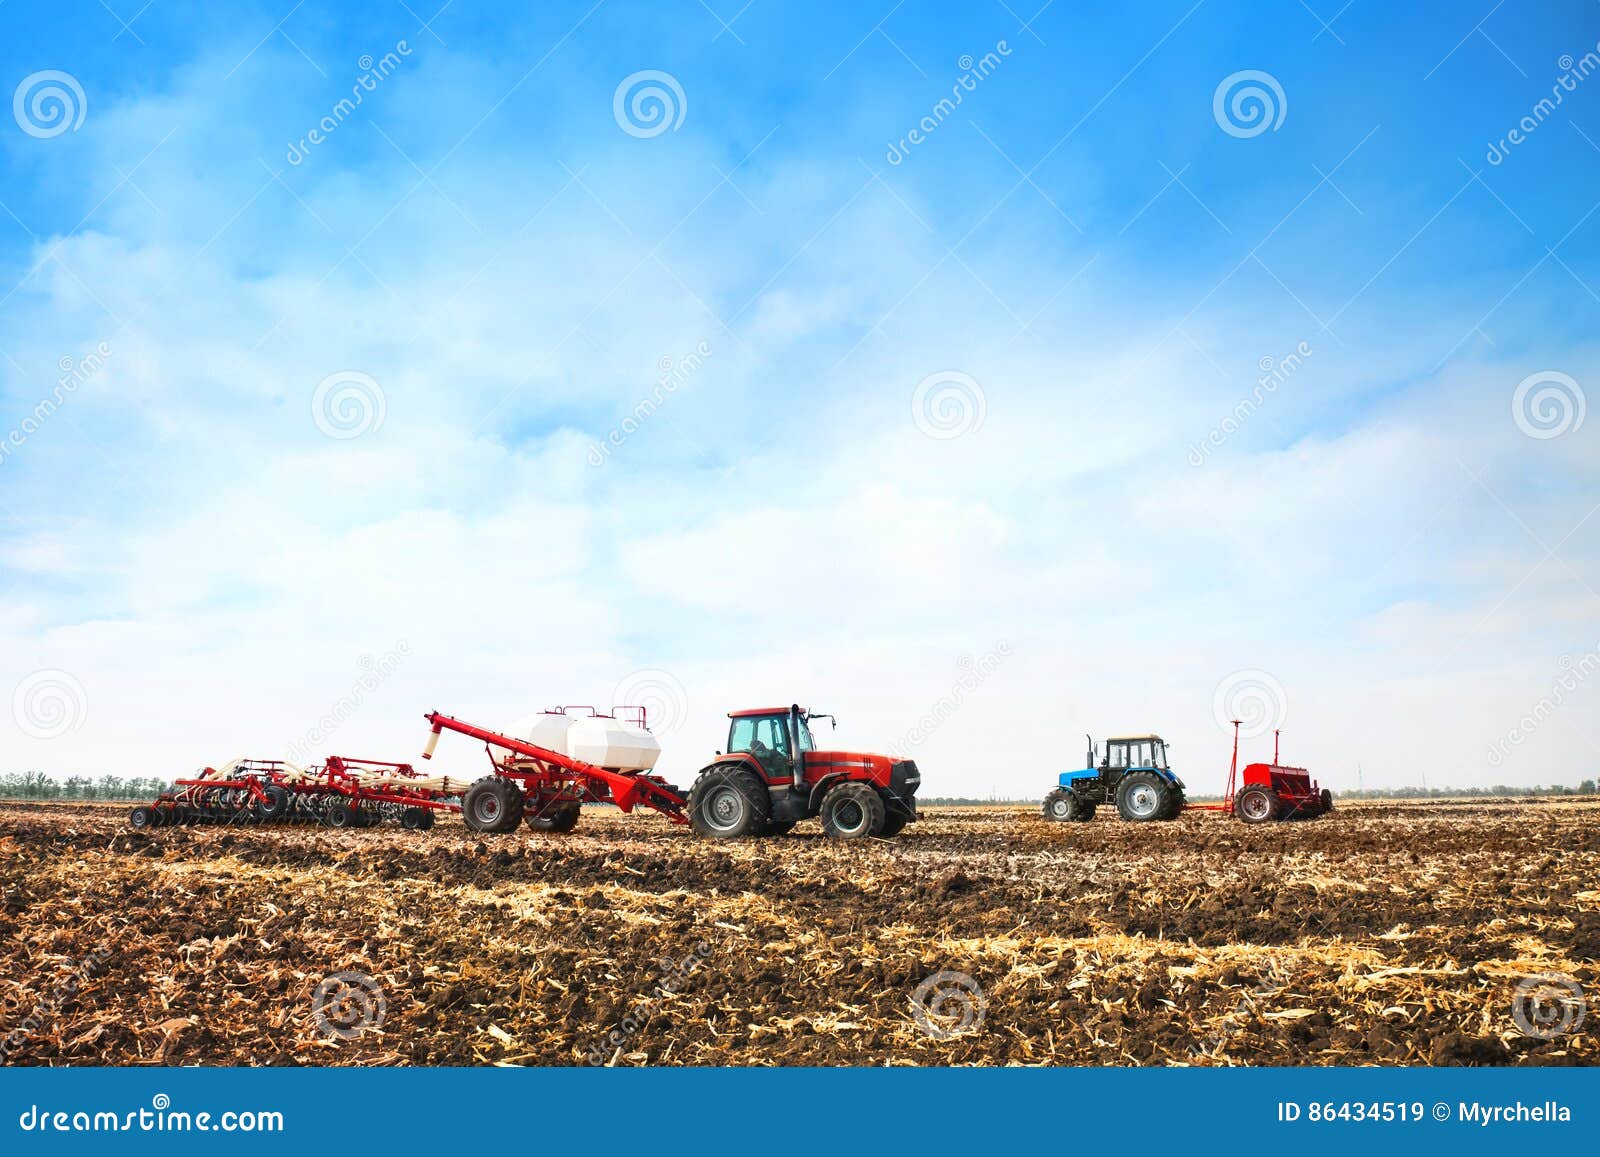 tractors with tanks in the field. agricultural machinery and farming.